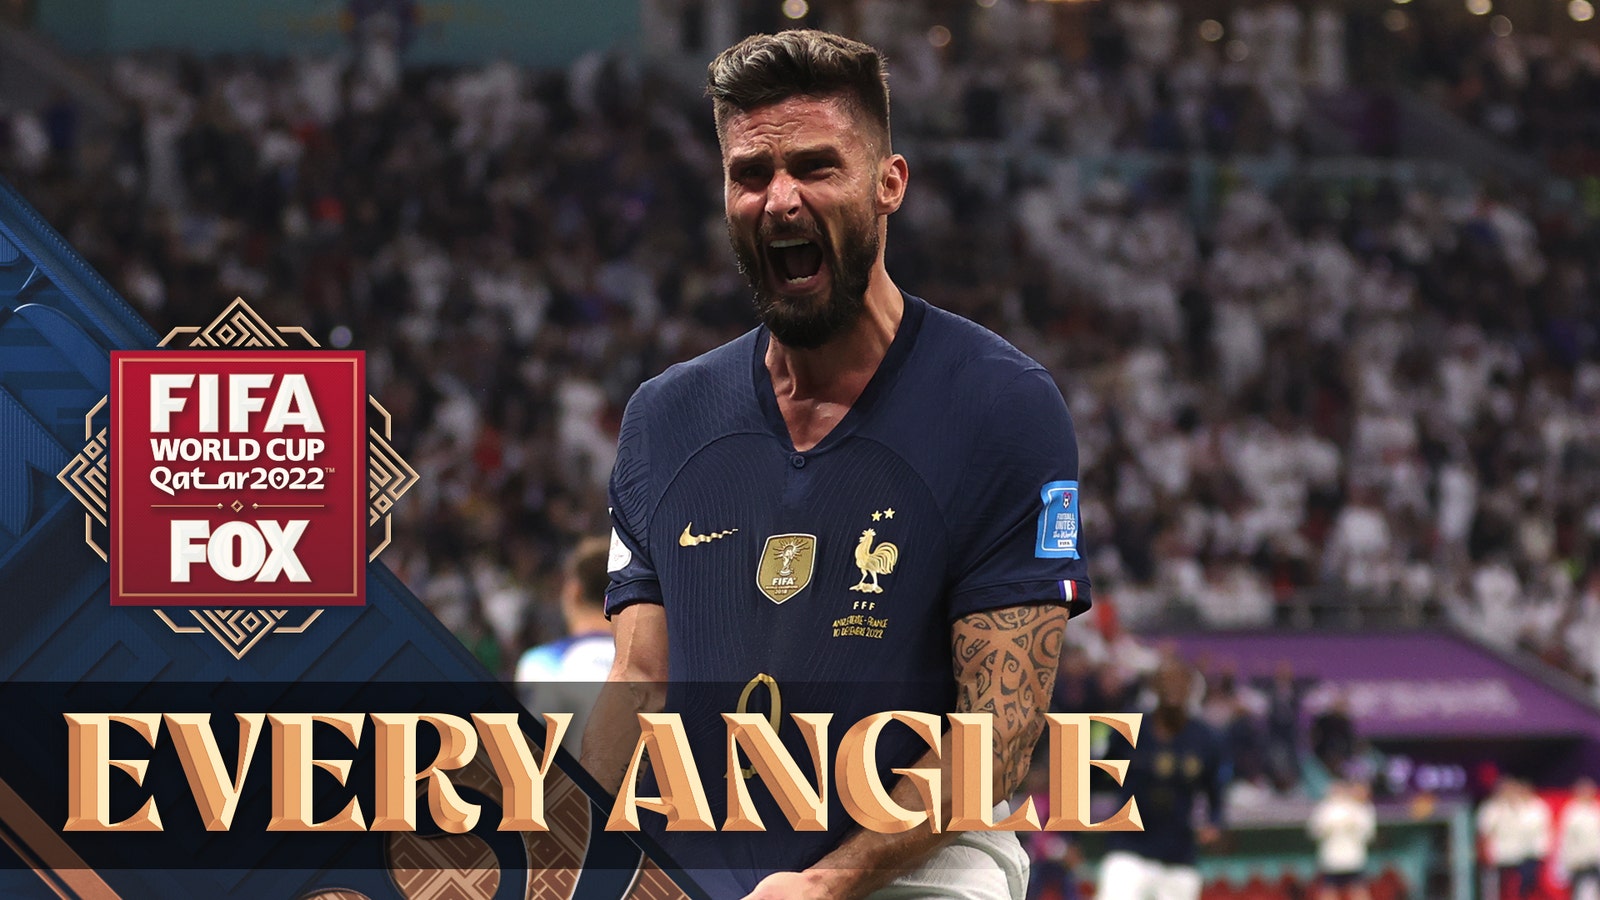 Olivier Giroud makes an INCREDIBLE game-winning header for France in the 2022 FIFA World Cup | Every Angle